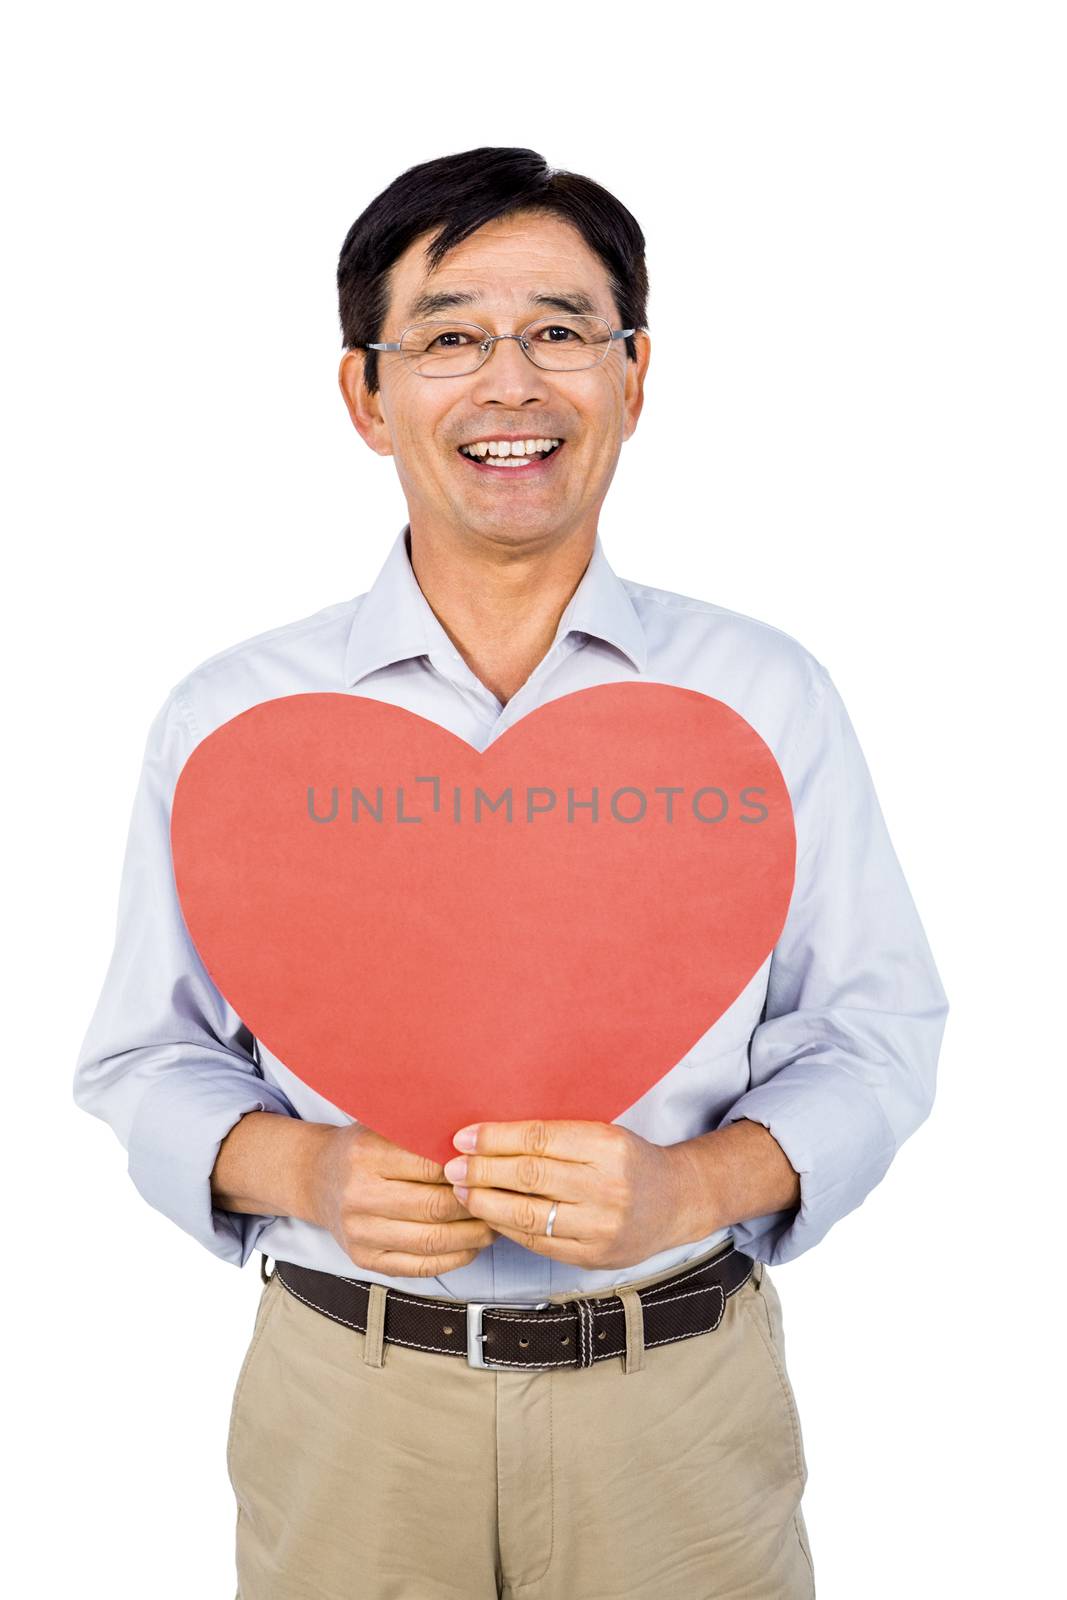 Older asian man showing heart on white background